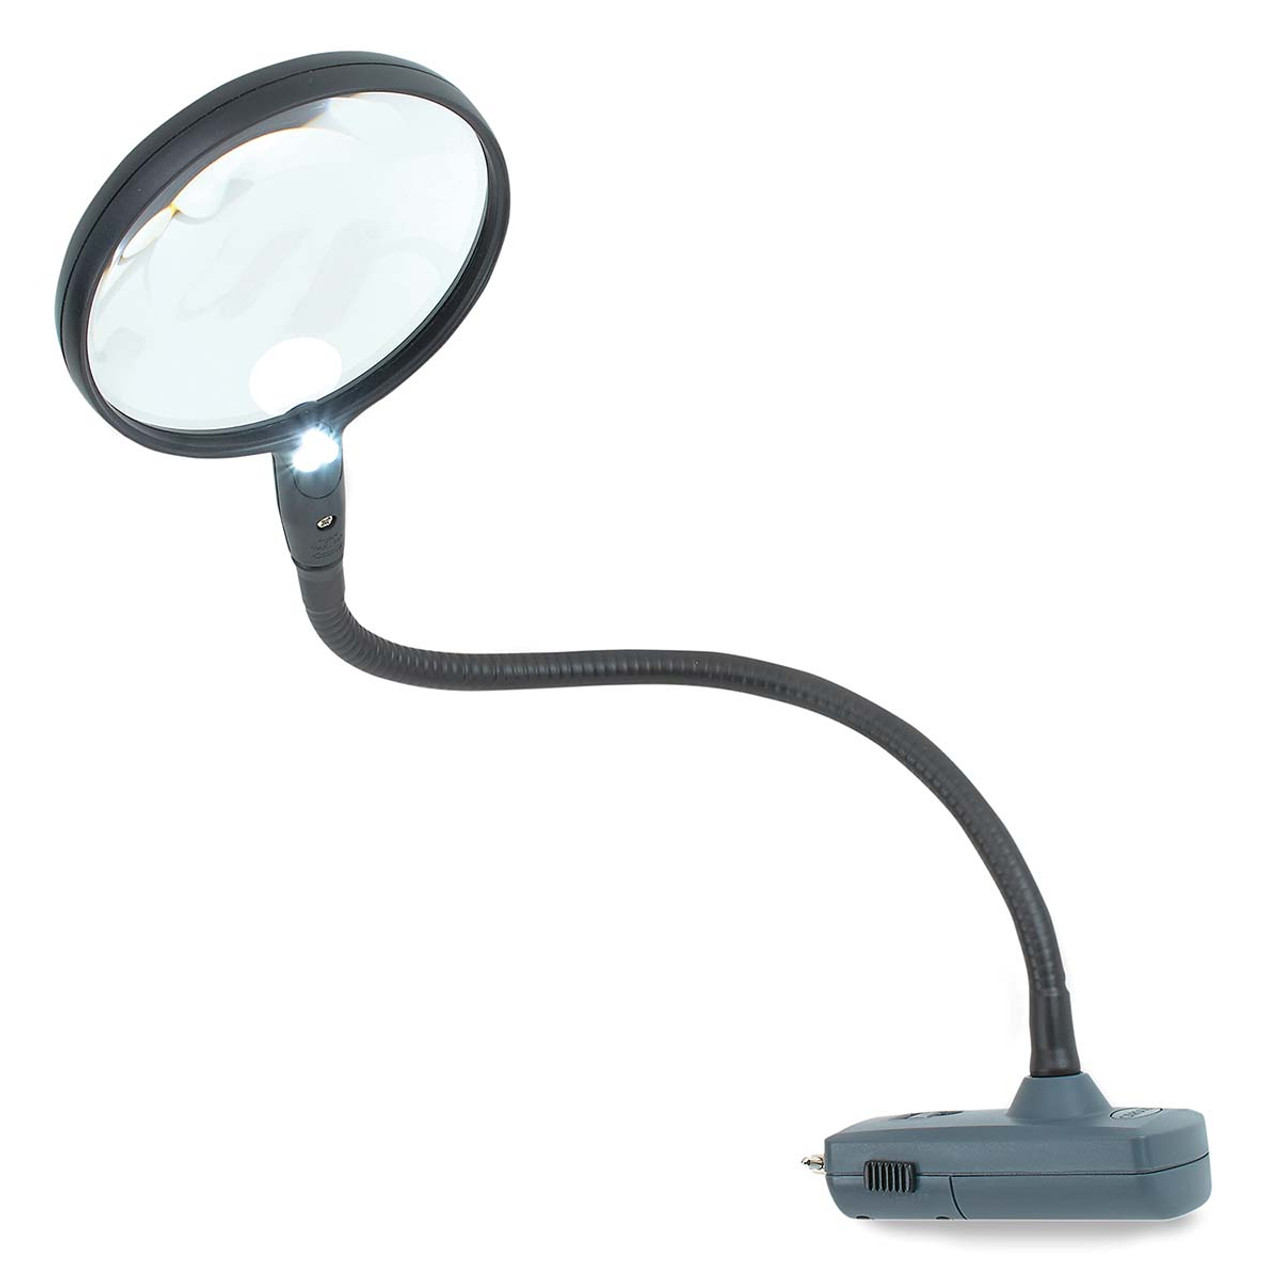 Illuminated Arm Magnifier (Brand Name: Fleximag) at Rs 4800, Chinchwad